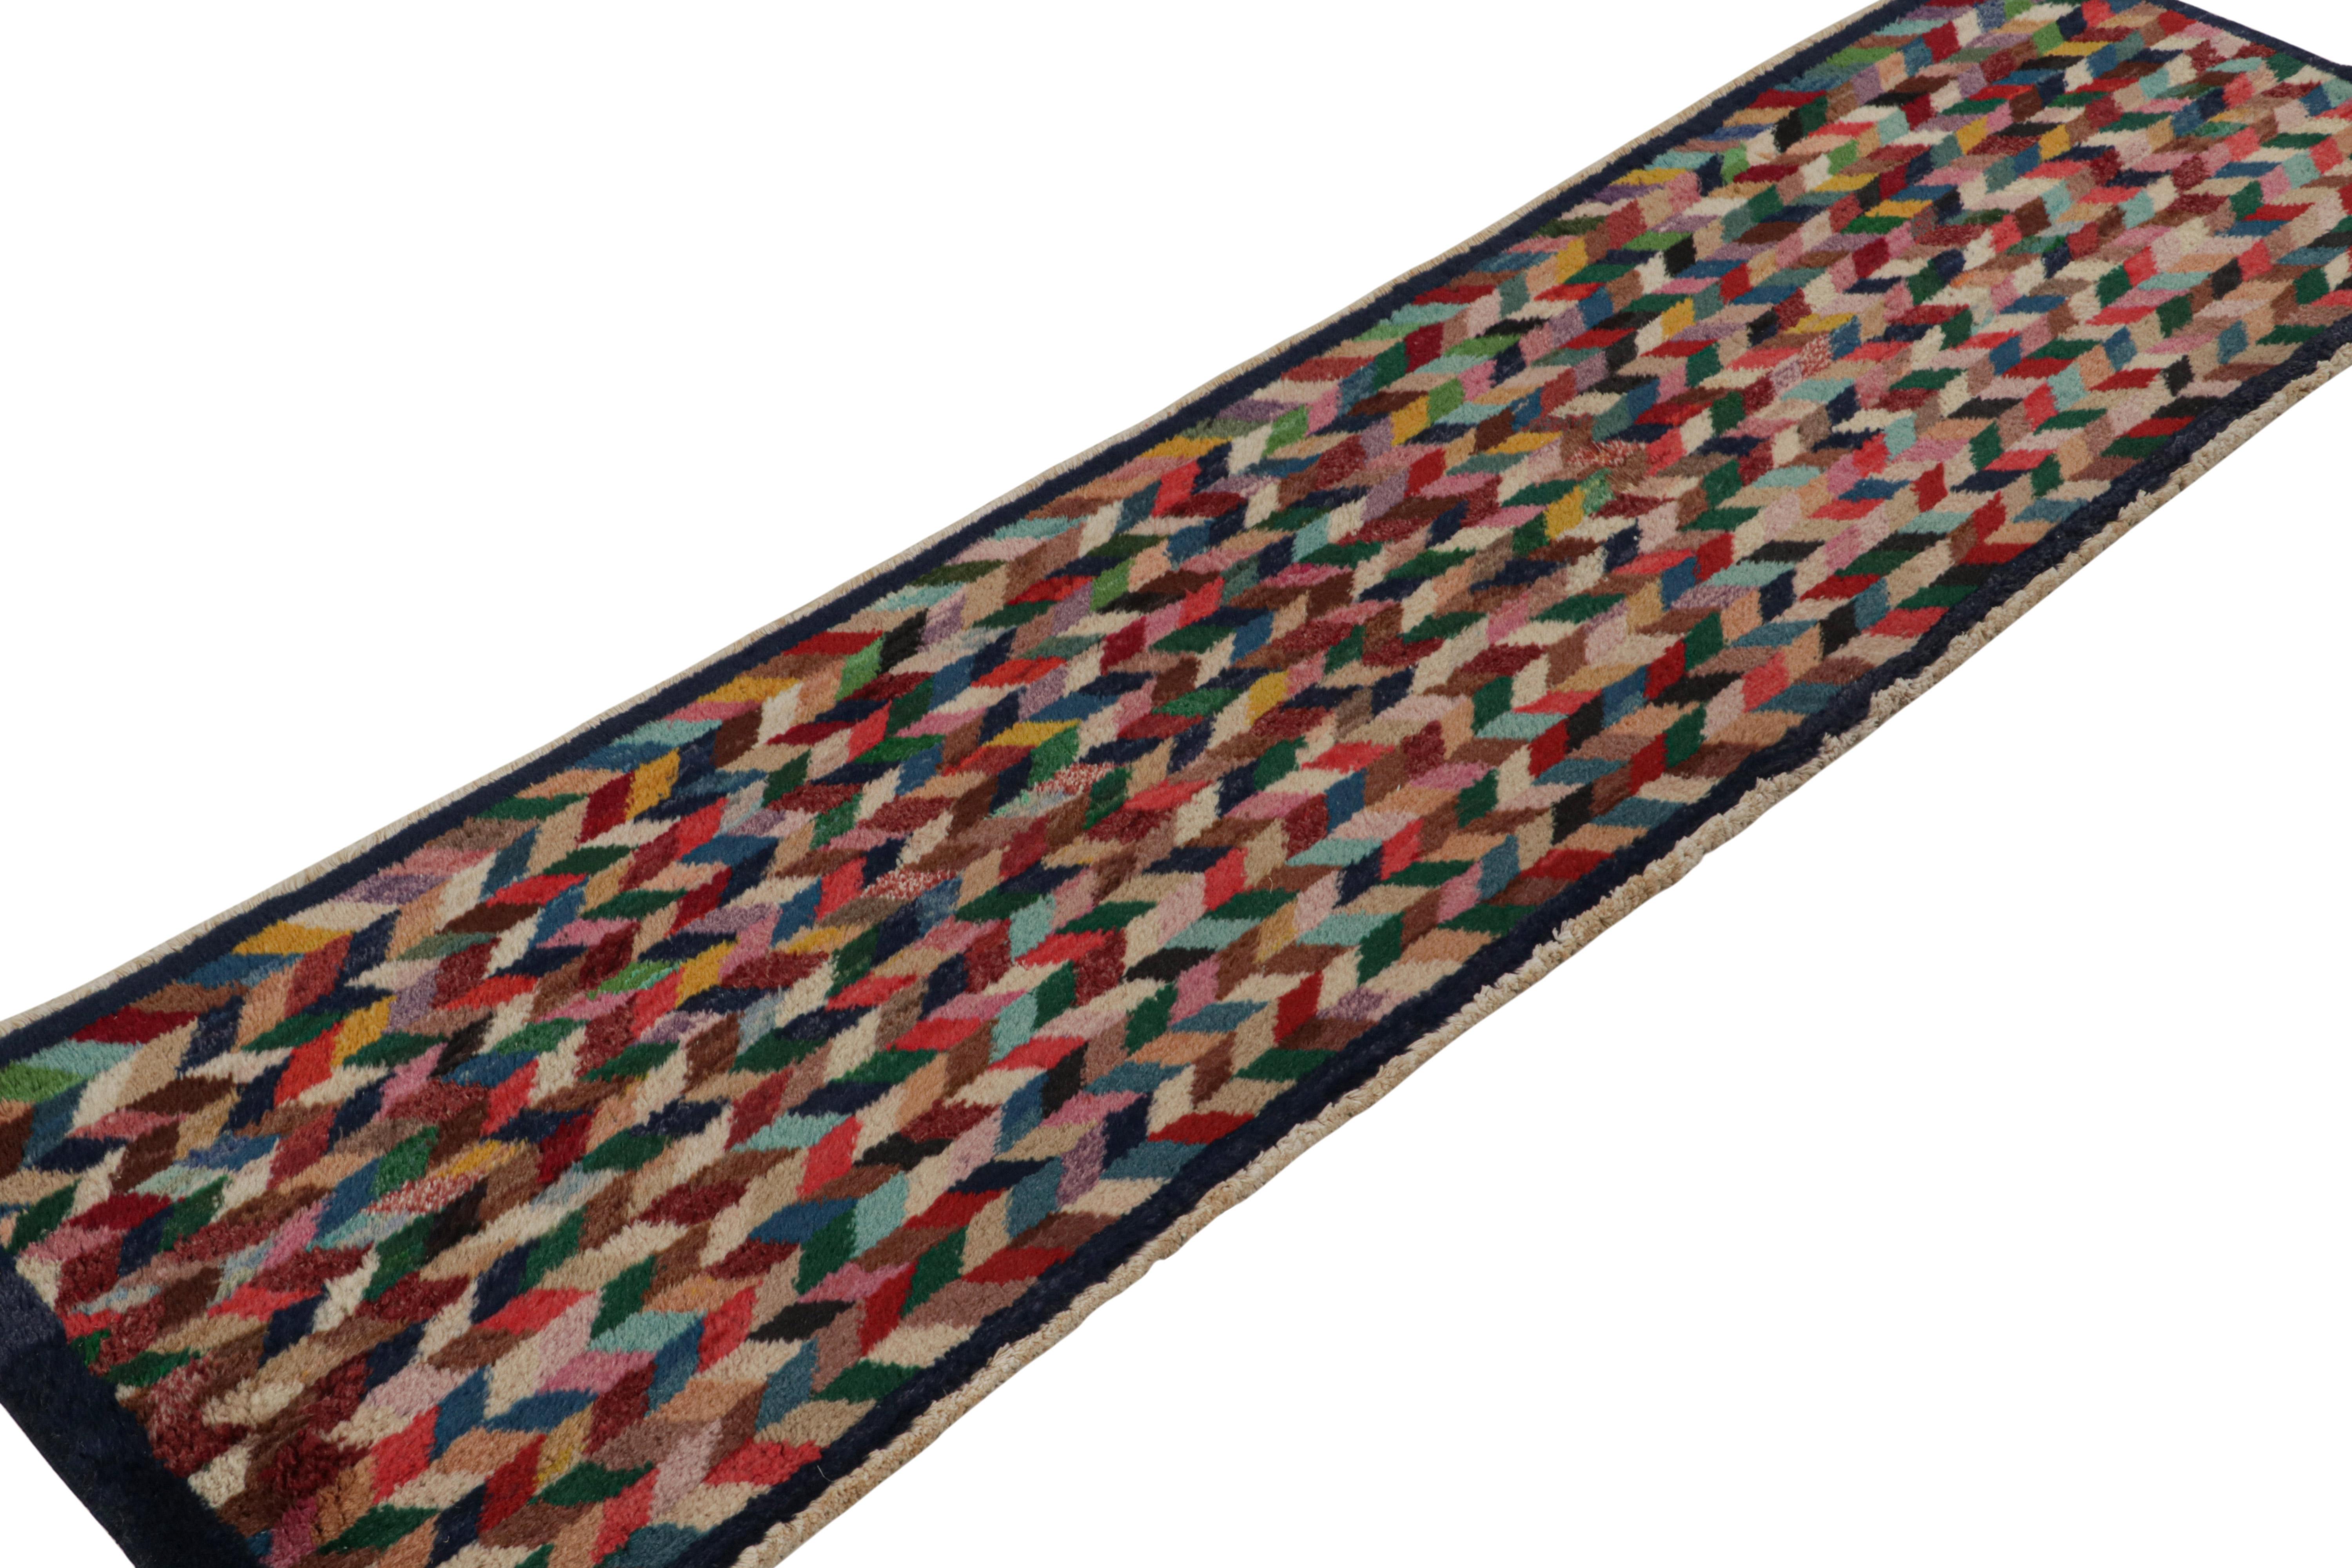 Hand-knotted in wool, this 2x8 vintage Afghan polychromatic runner rug has colorful geometric patterns all over the field. Its design is very distinct given its blend of nomadic and modern sensibilities. 

On the Design: 

Connoisseurs will